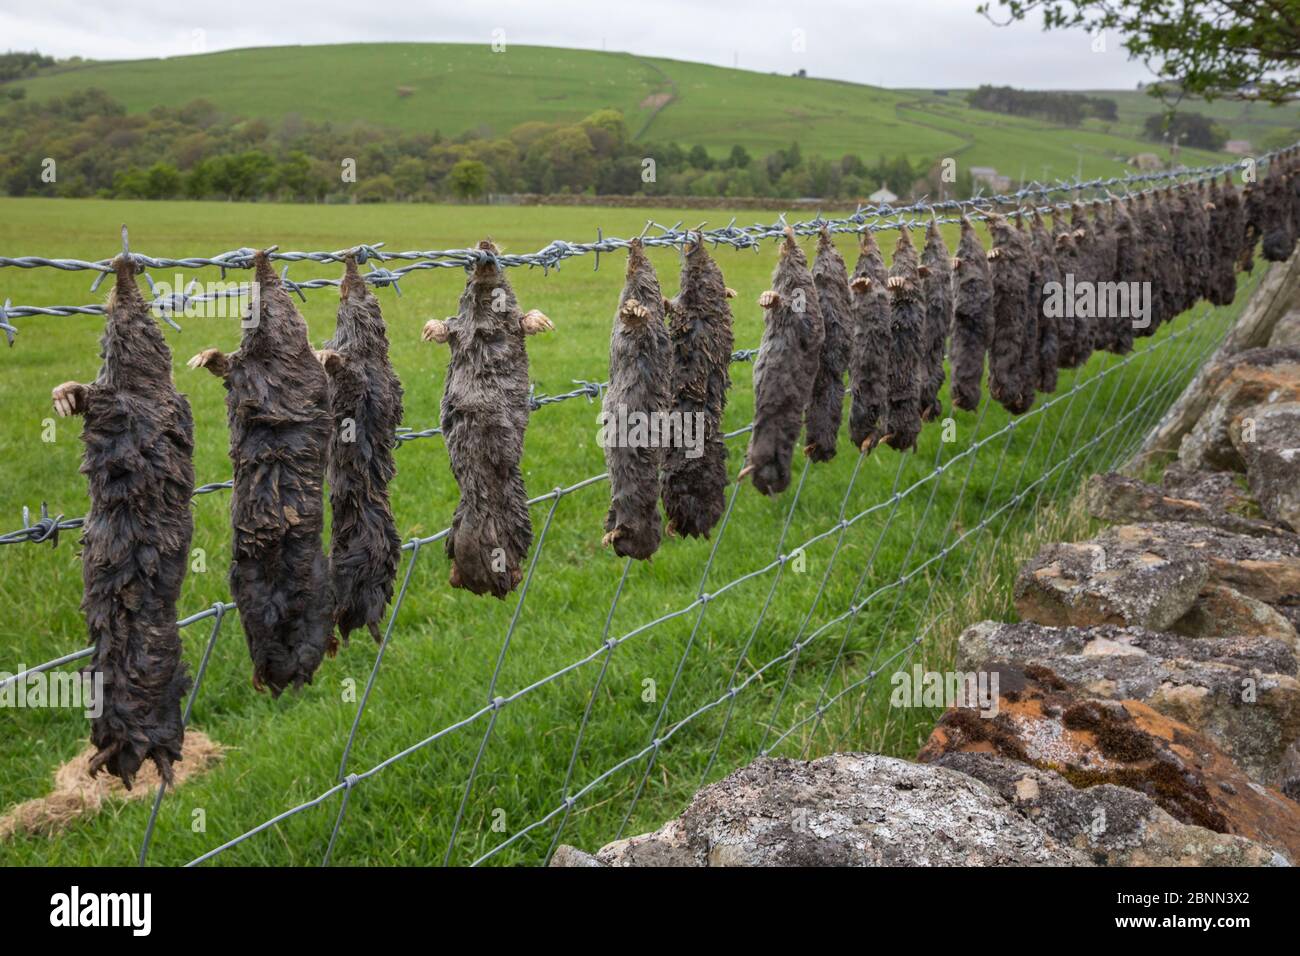 Dead moles (Talpa europea) hung up in a line on barbed wire. Durham, UK. May. Stock Photo